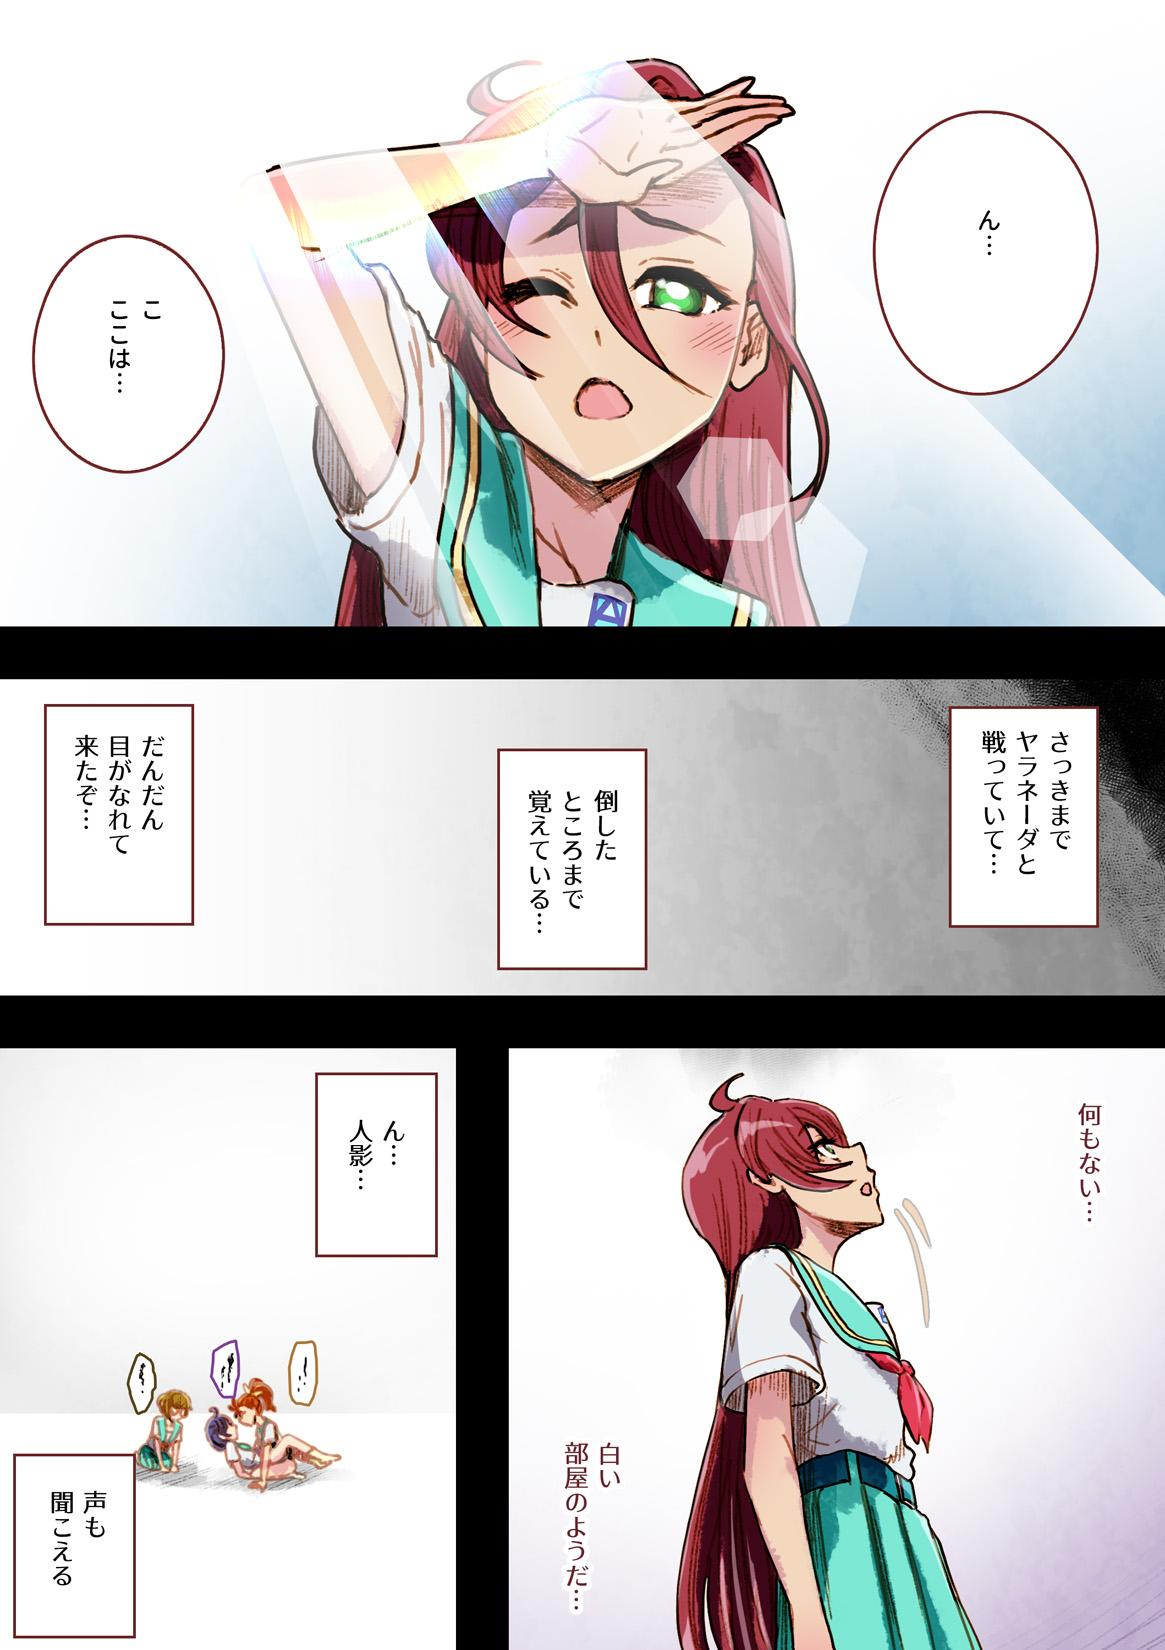 Pounded Precure ga Haireru Shiroi Heya - Tropical-rouge precure Chibola - Page 4